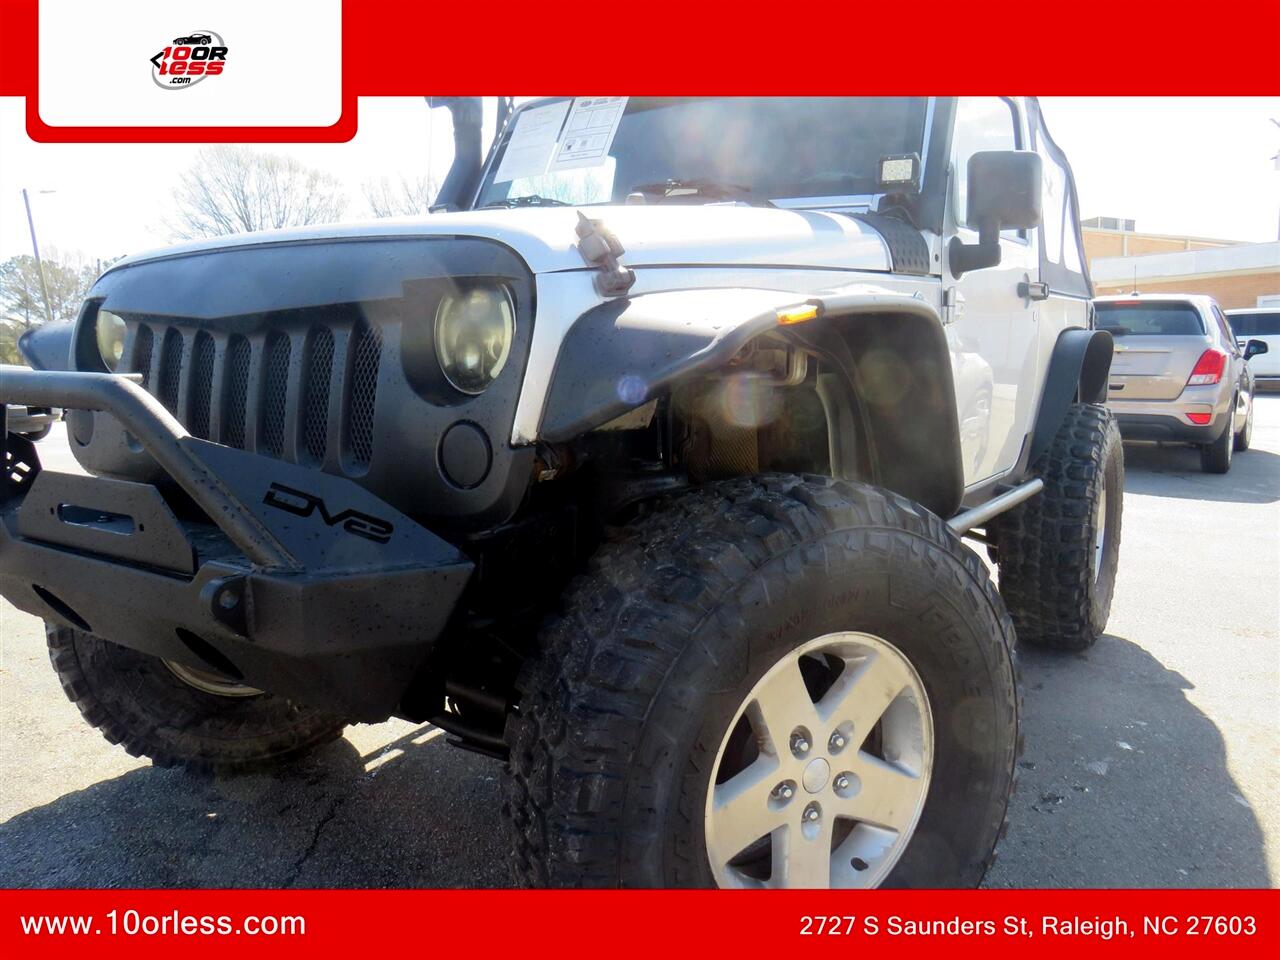 Used 2008 Jeep Wrangler Rubicon for Sale in Raleigh NC 27603 